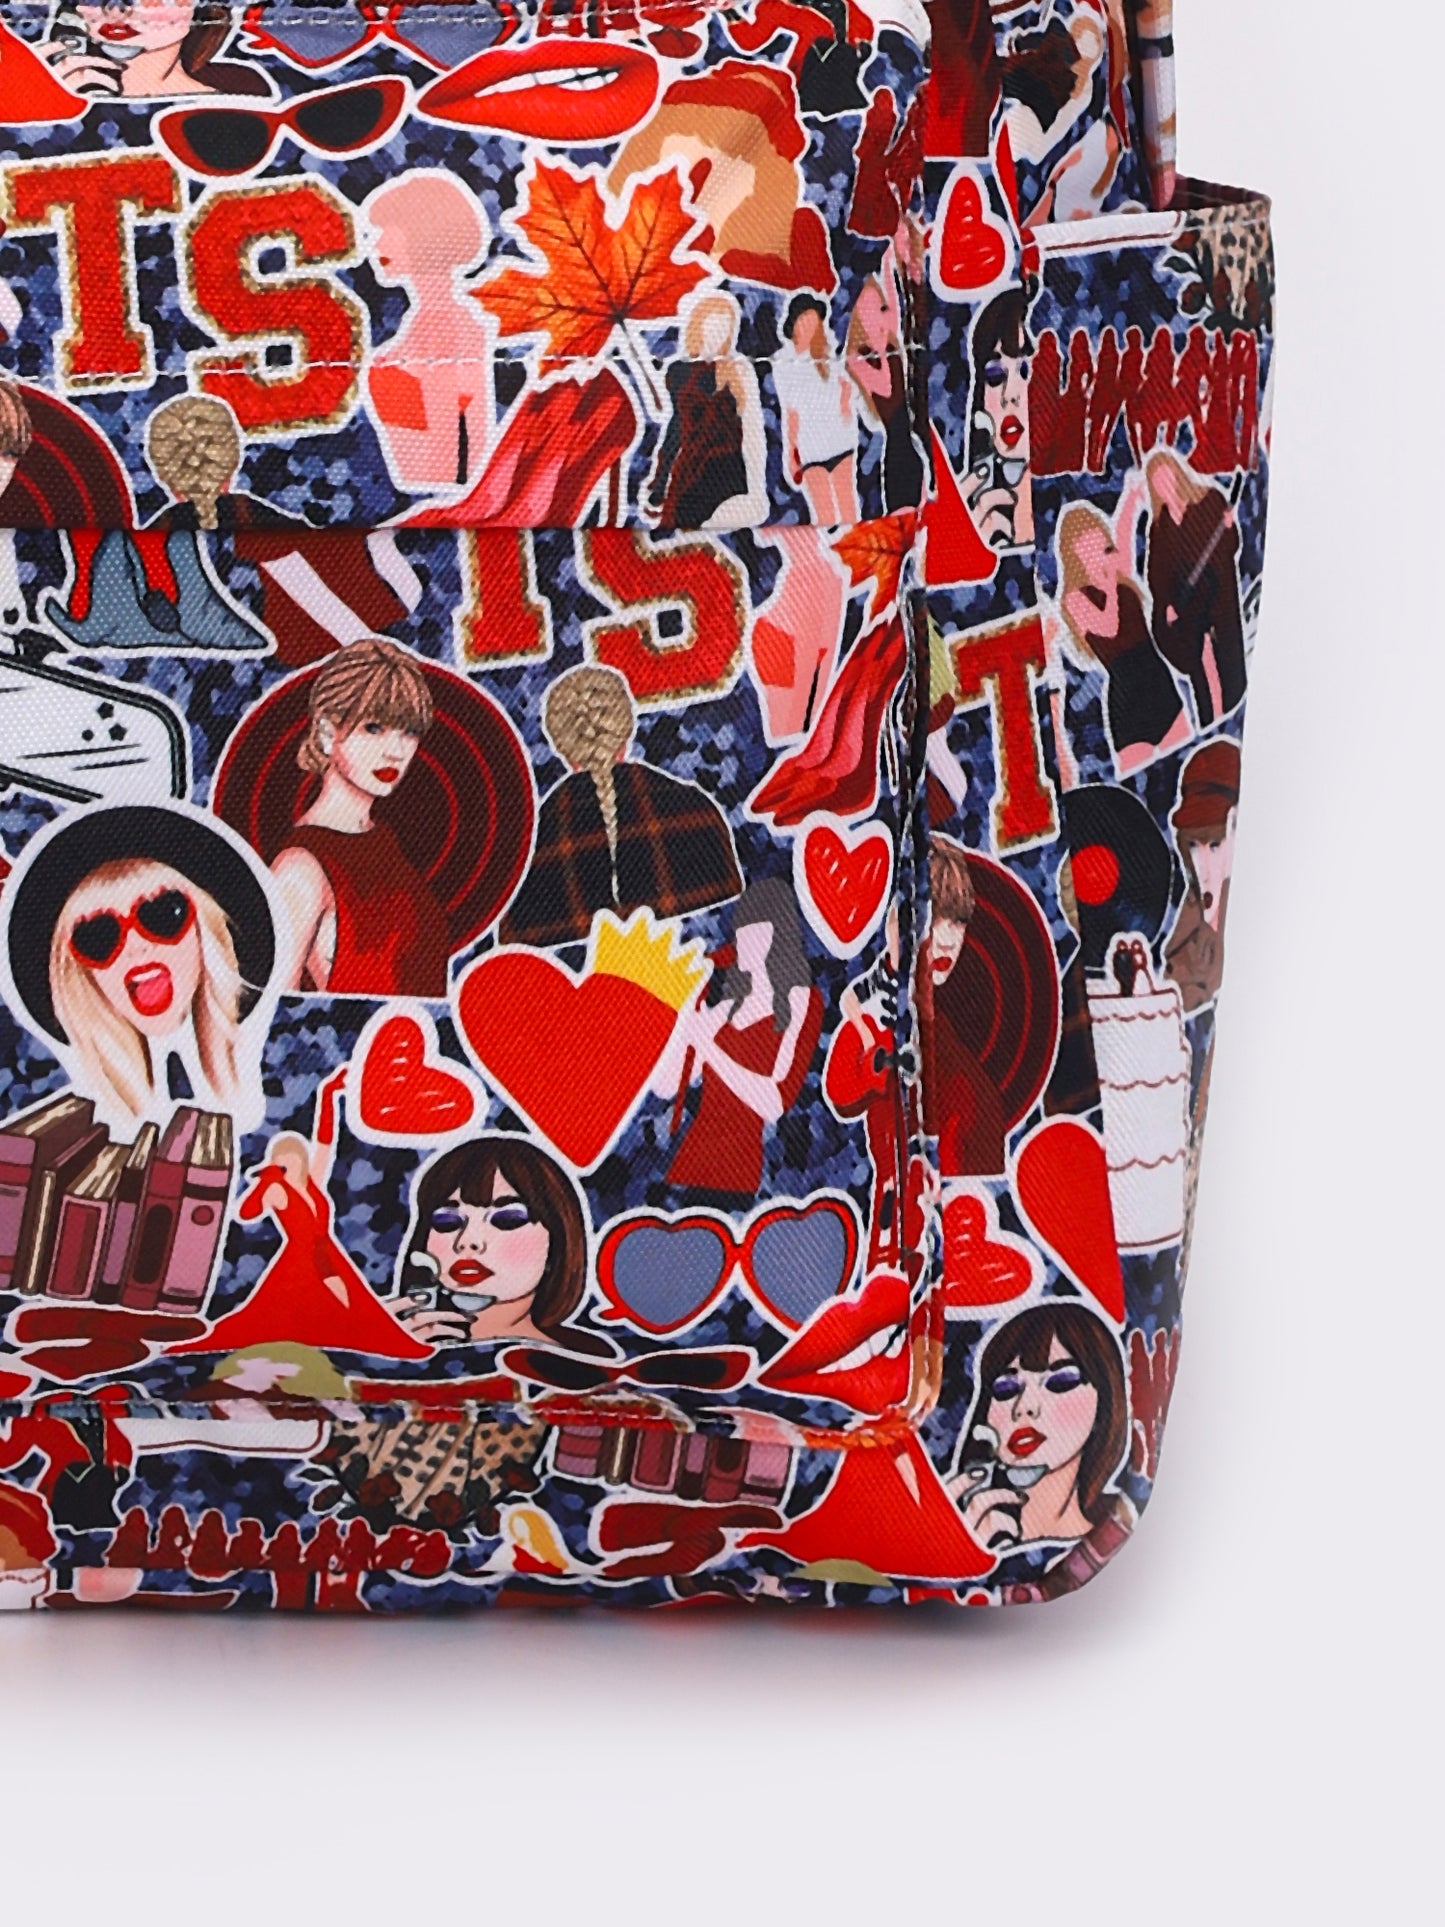 Red Music Tour Printed Girls Backpack